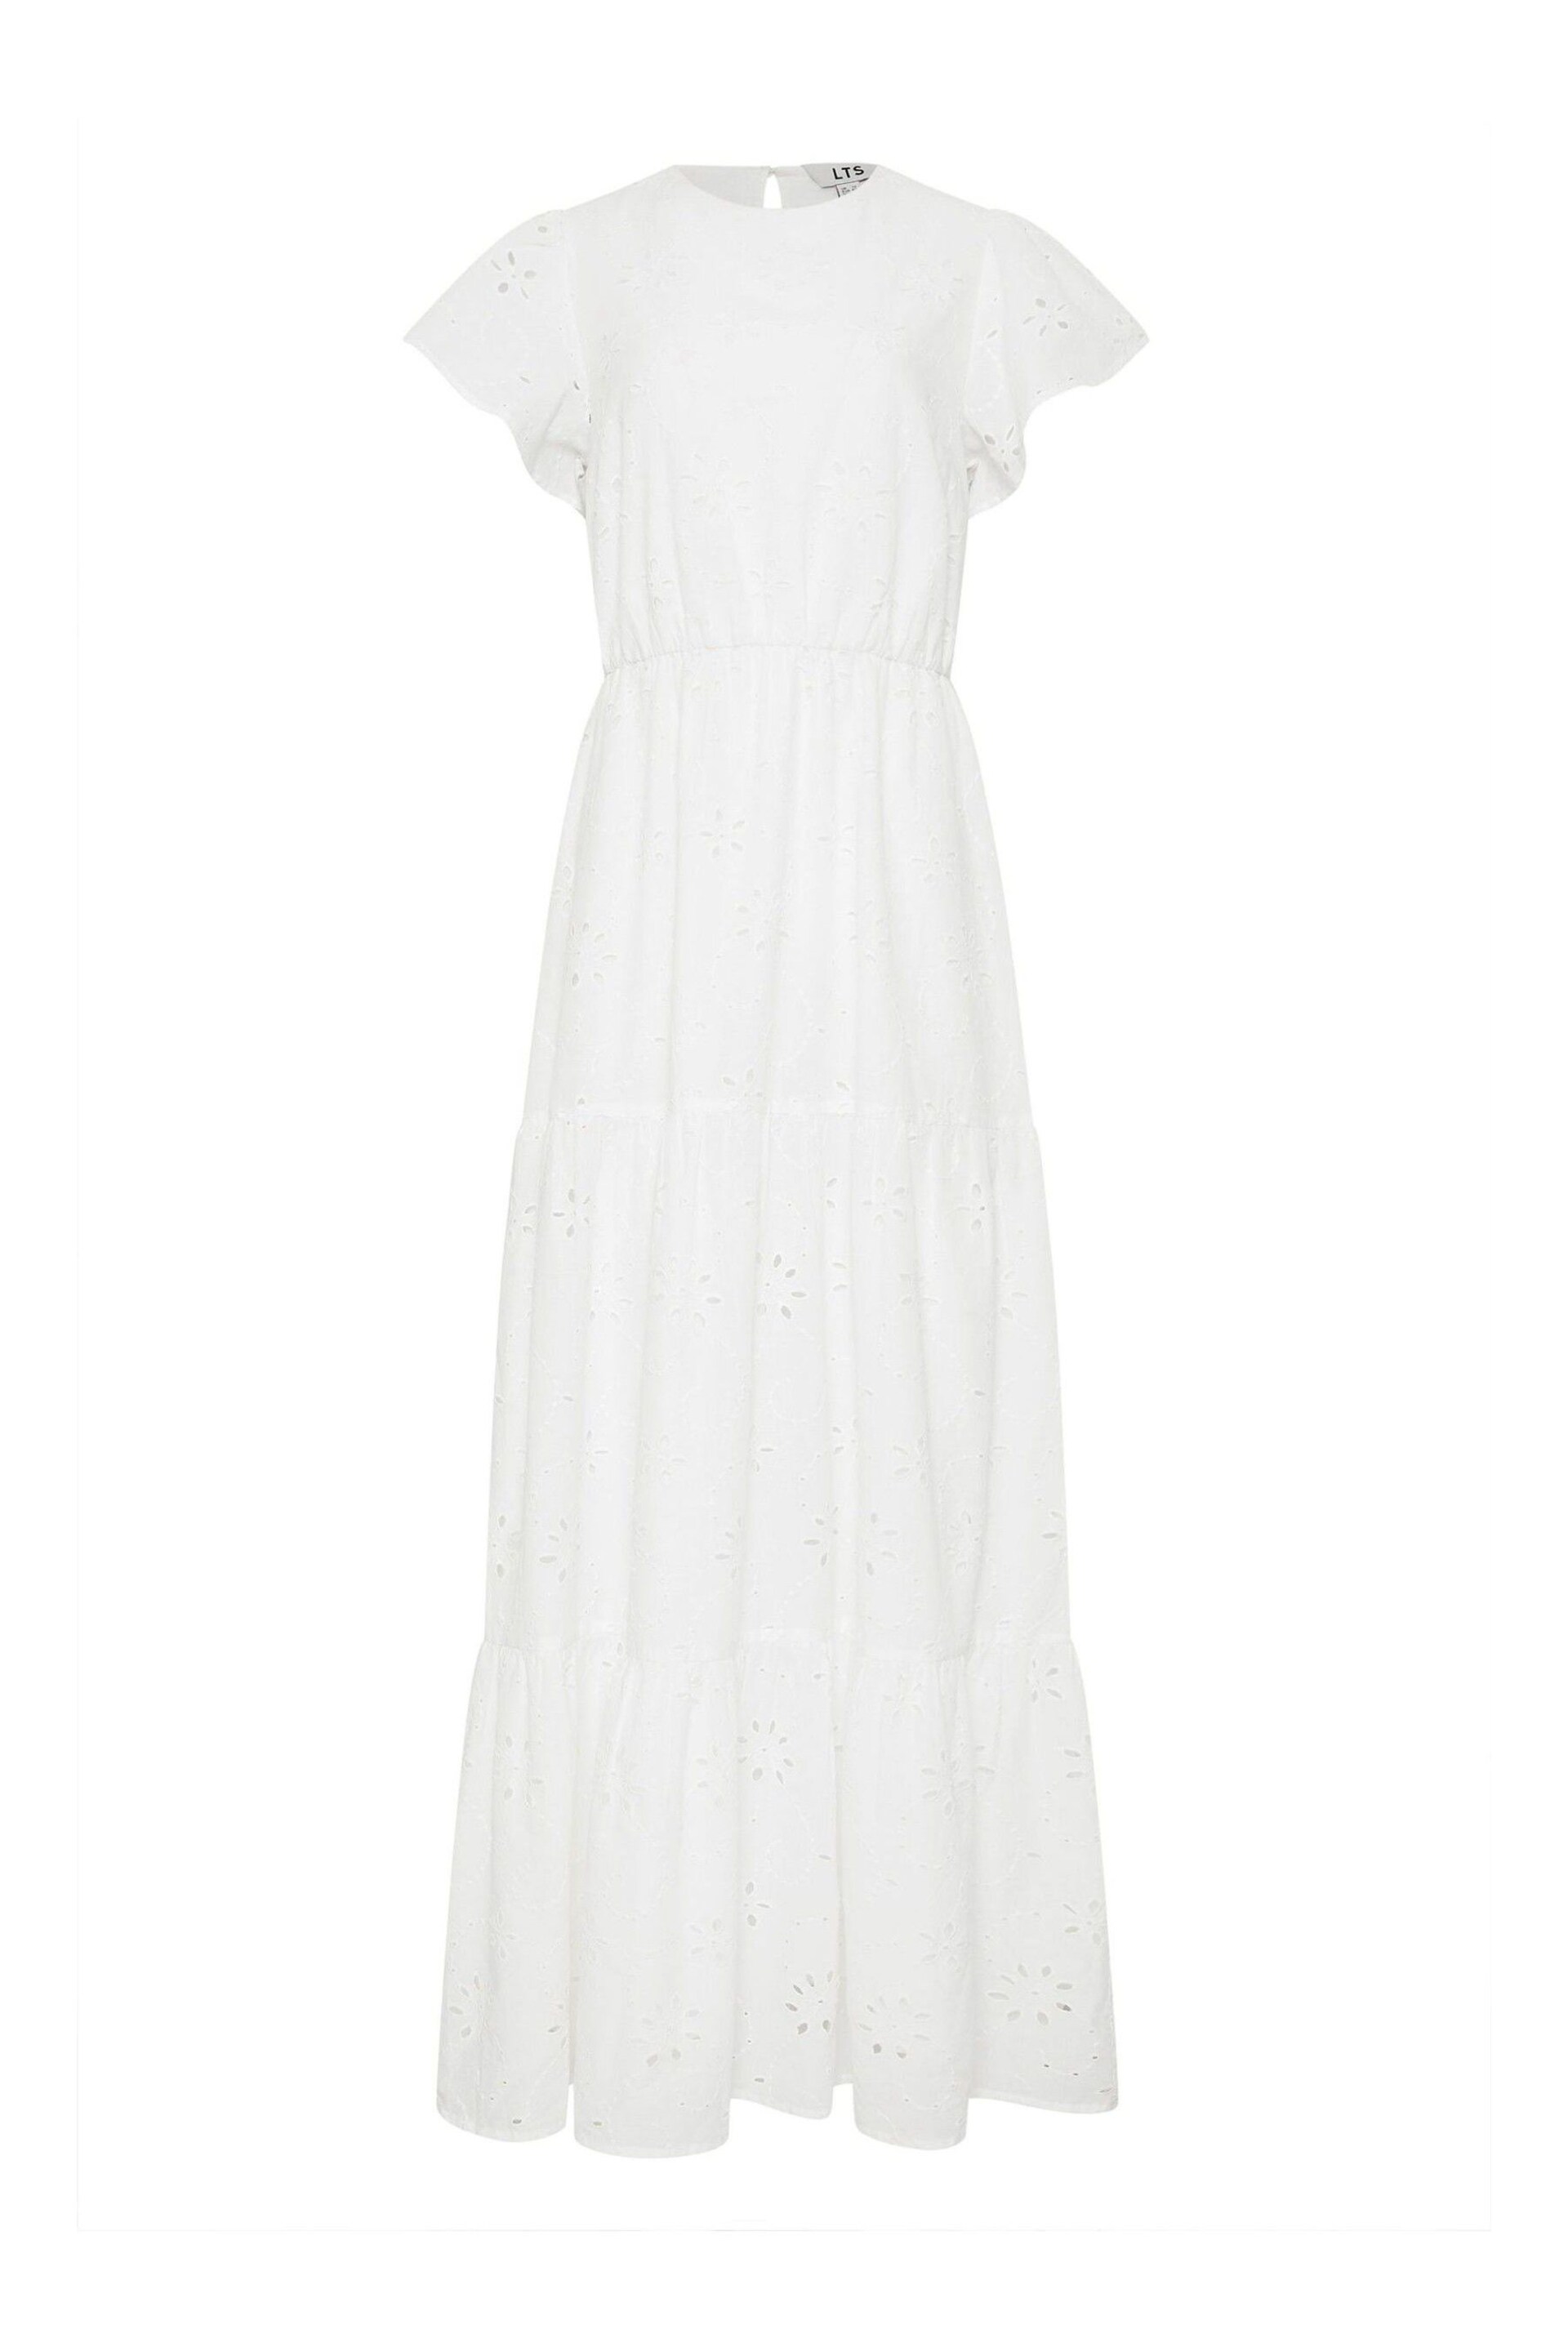 Long Tall Sally White Flutter Sleeve Tiered Dress - Image 5 of 5